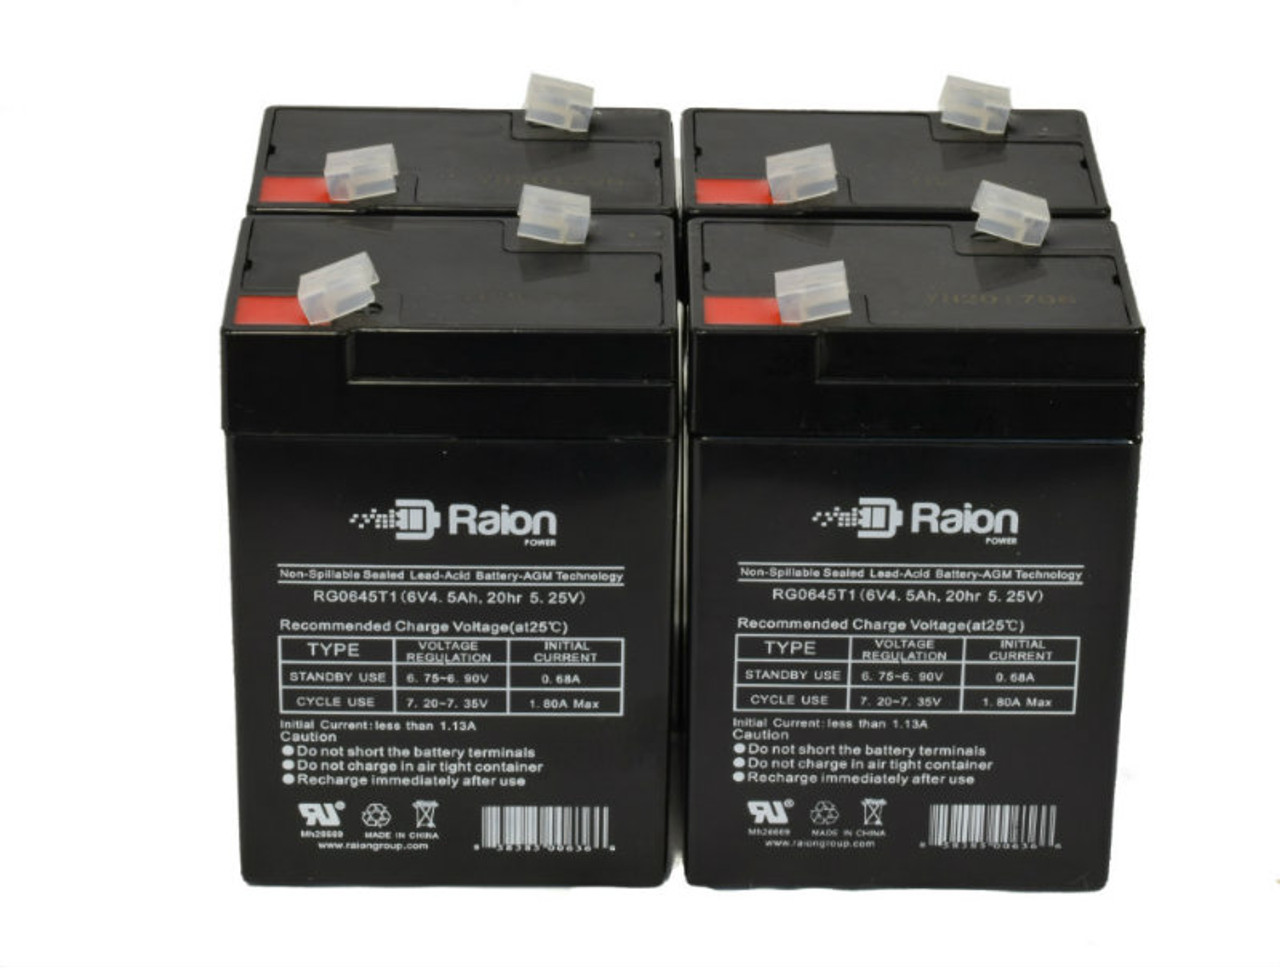 Raion Power 6V 4.5Ah Replacement Emergency Light Battery for Dyna-Ray S18210 - 4 Pack